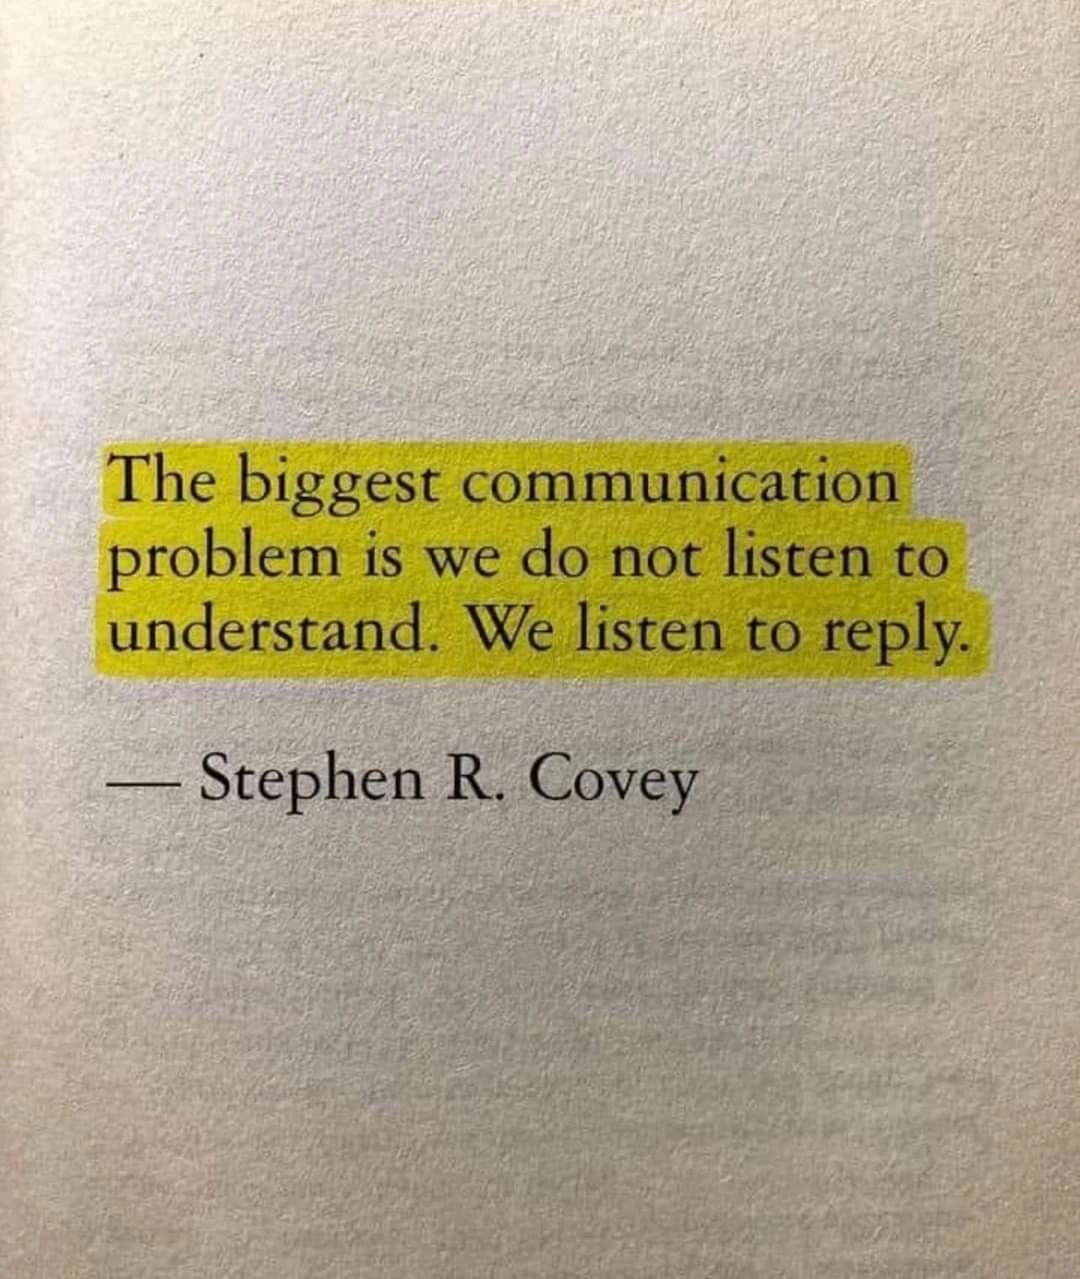 Kase Reighard on LinkedIn: This quote by Stephen R. Covey applies ...